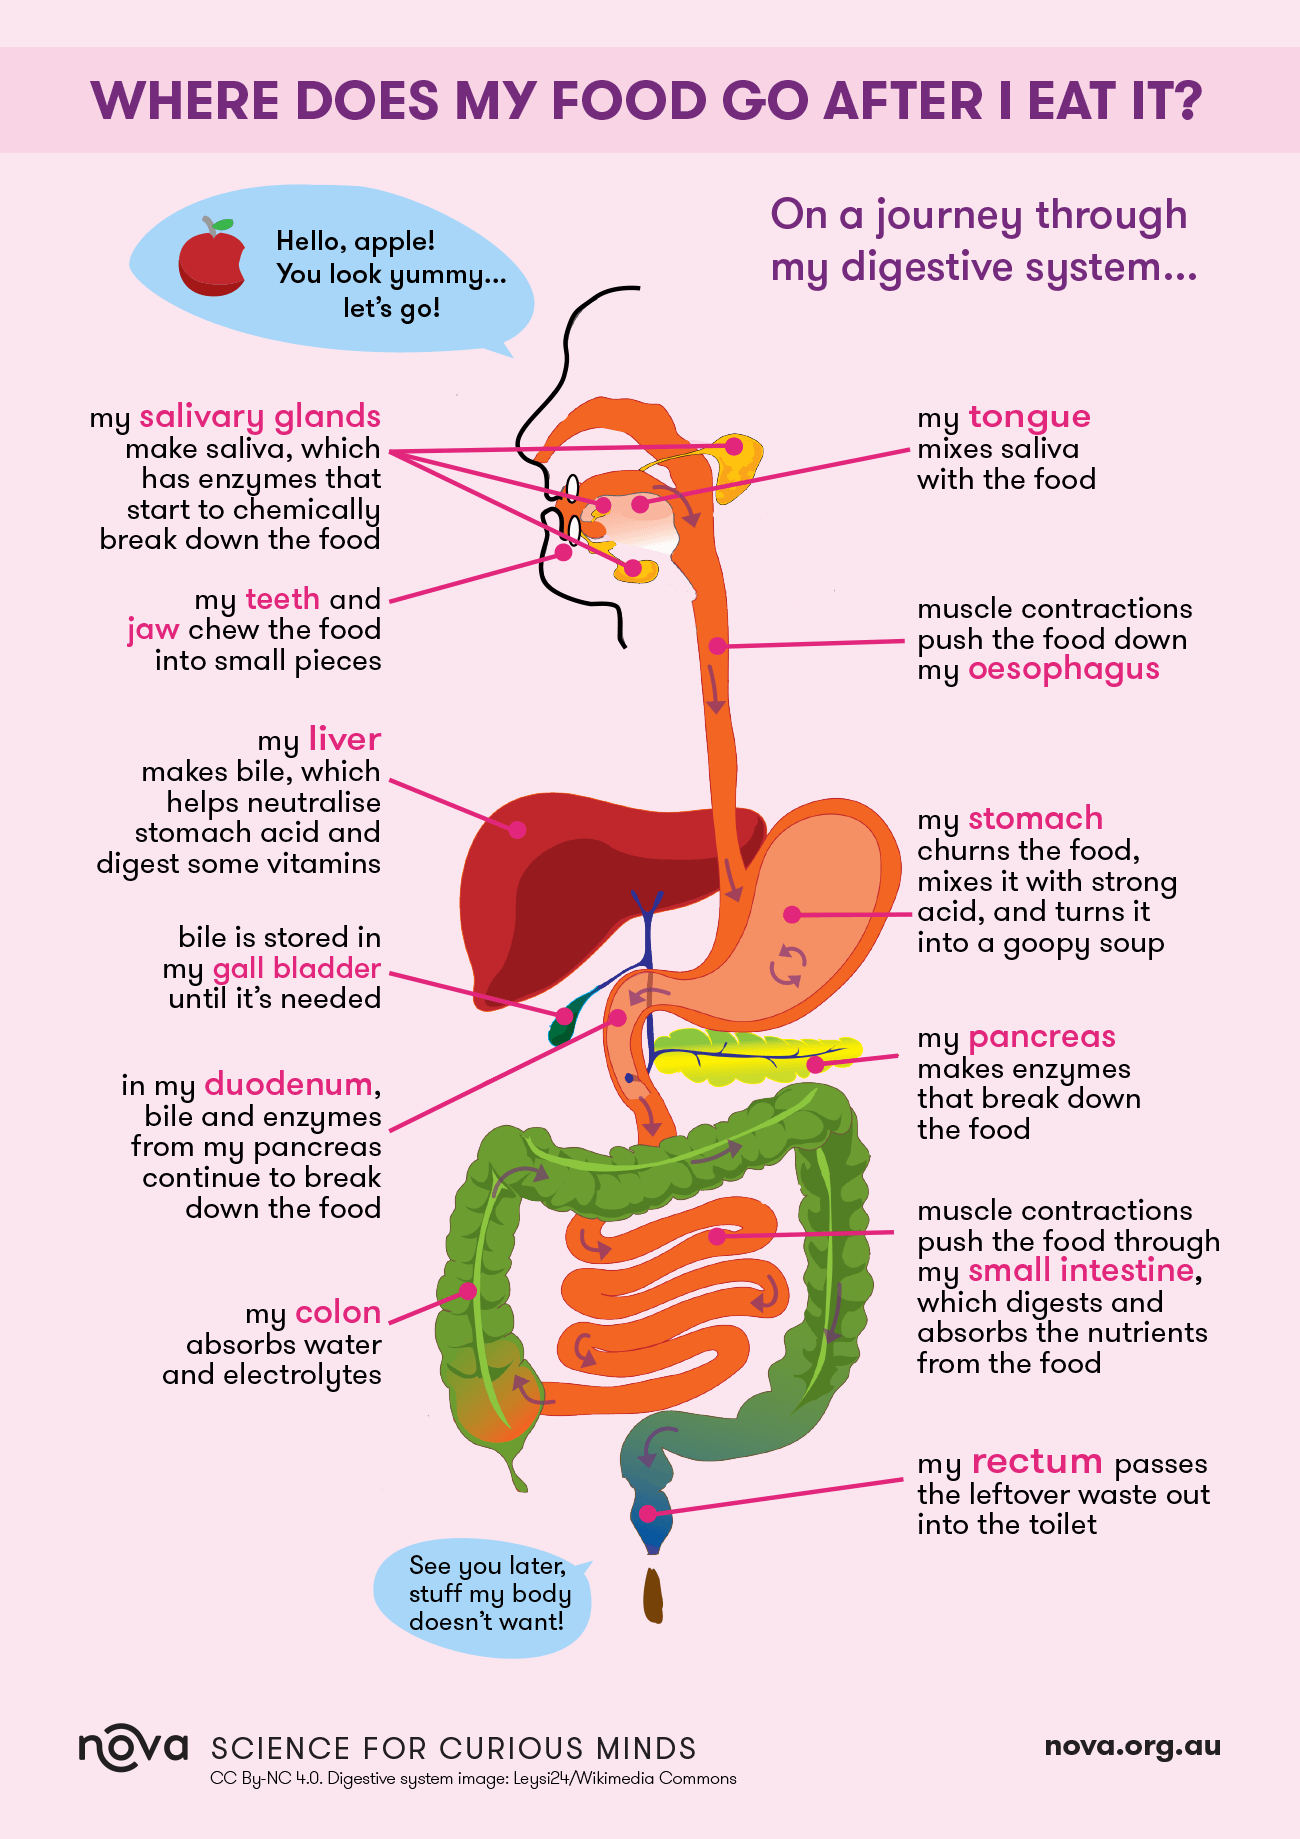 how fast can food travel through your body